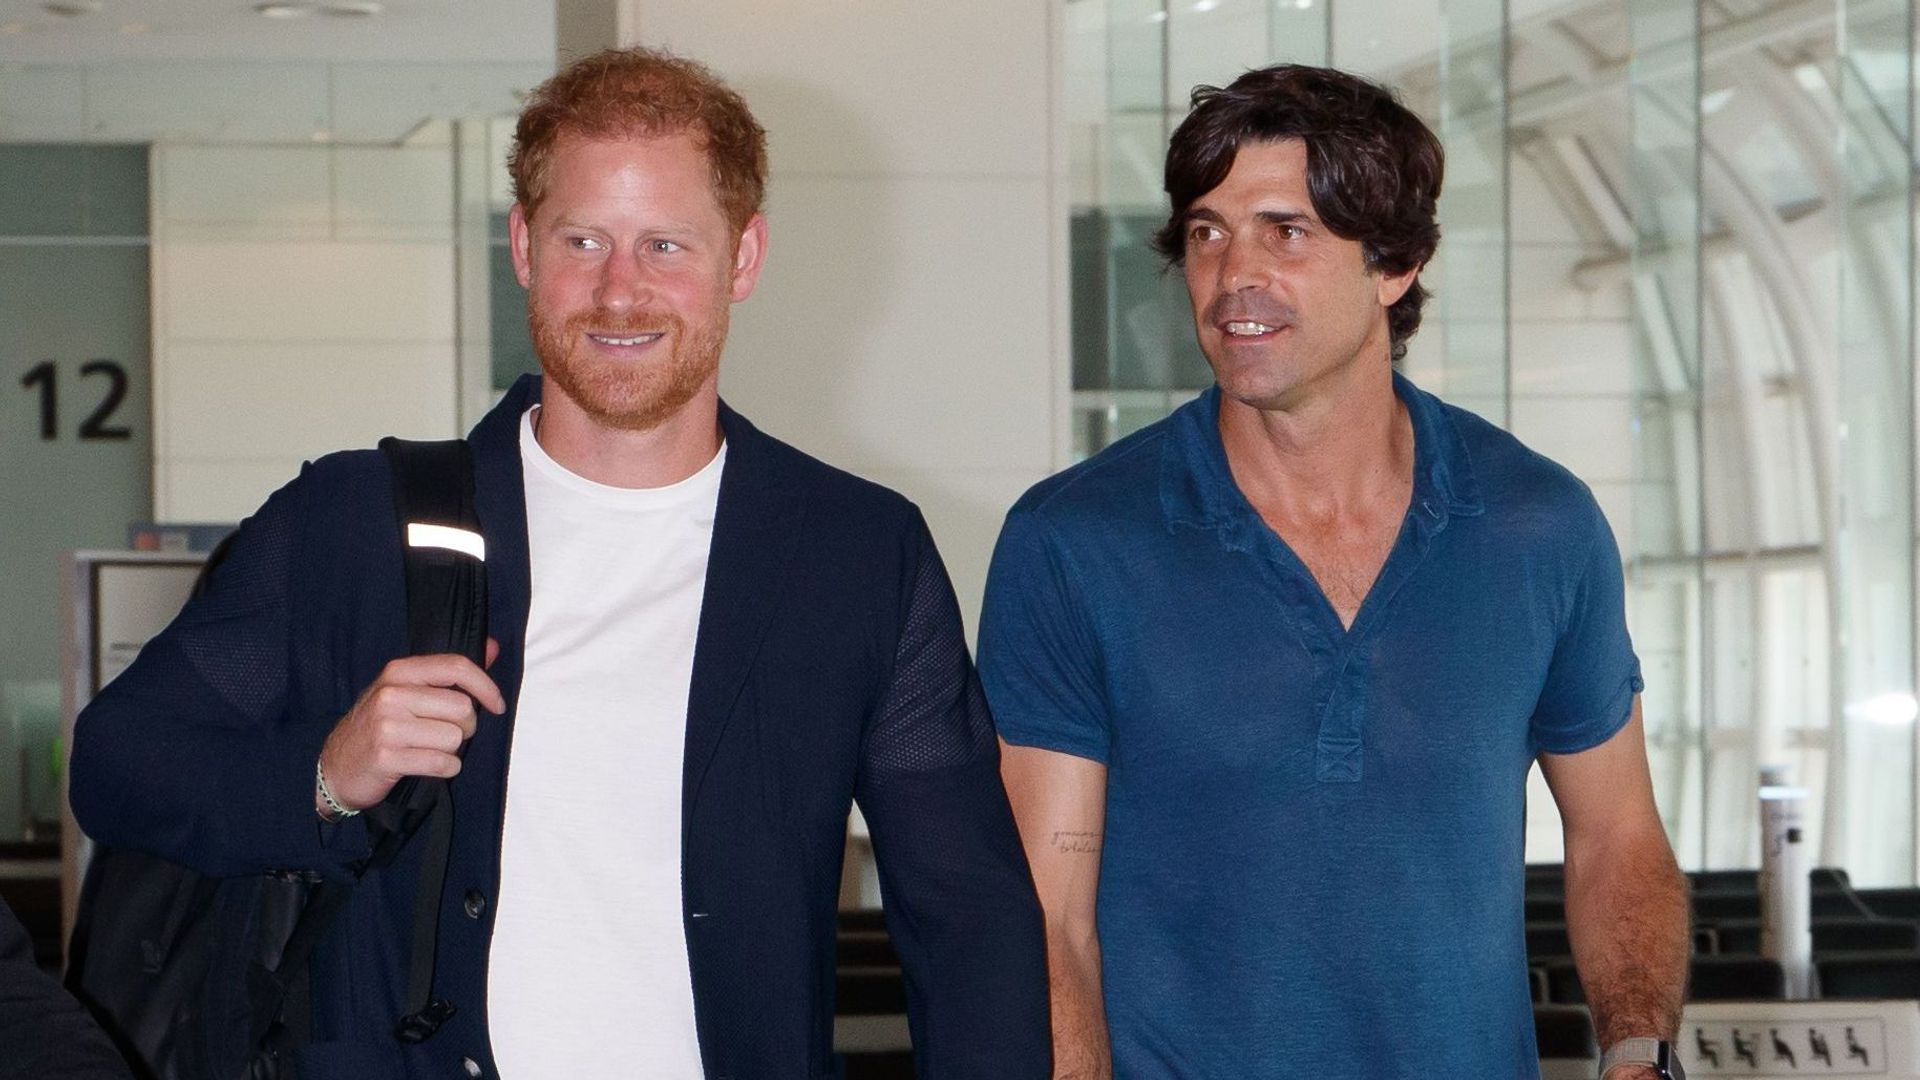 Prince Harry and Nacho Figueras board flight to Singapore